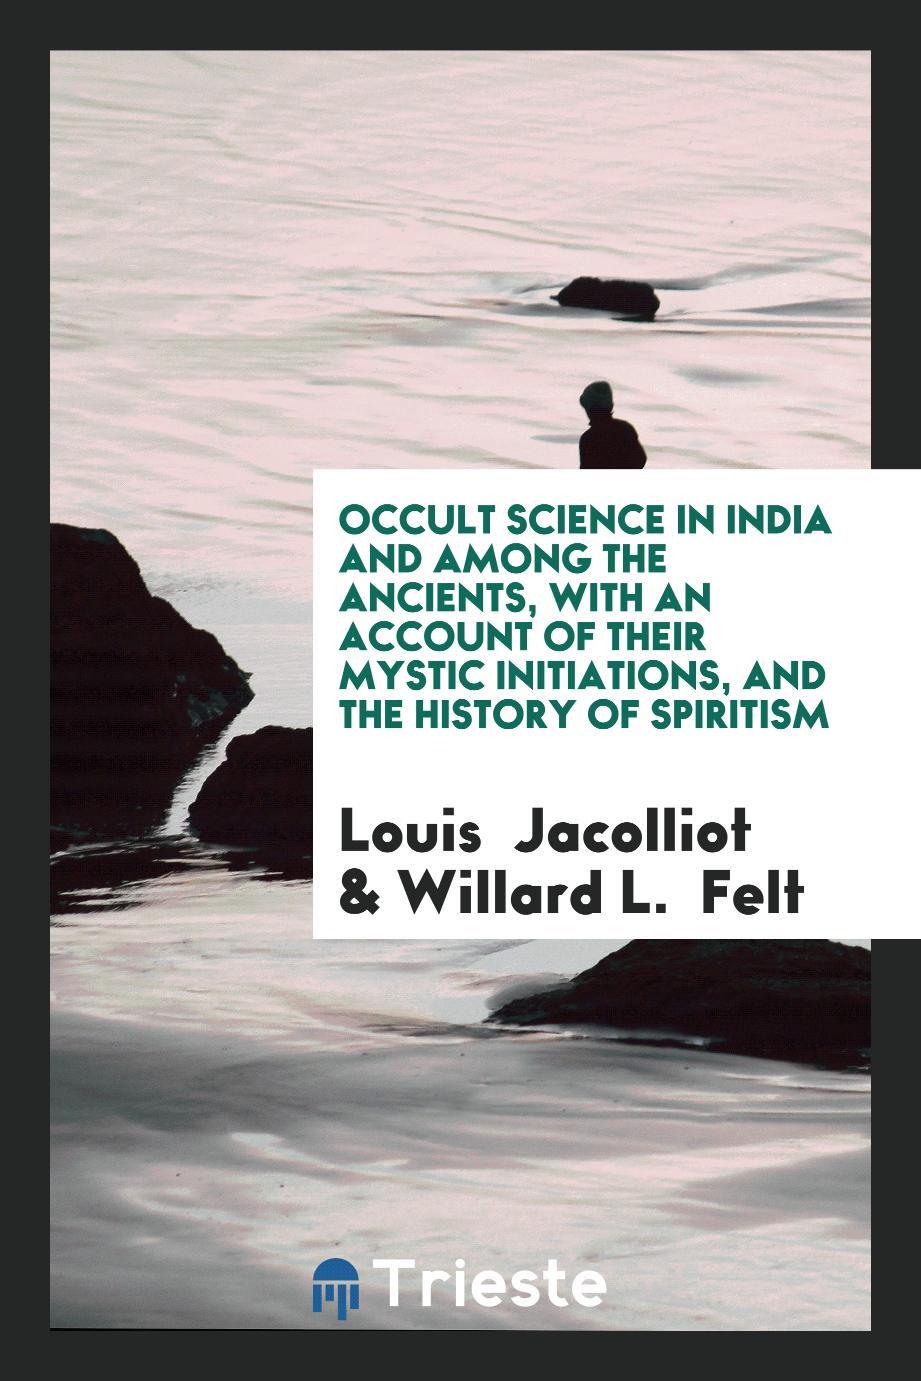 Occult Science in India and among the Ancients, with an Account of Their Mystic Initiations, and the History of Spiritism